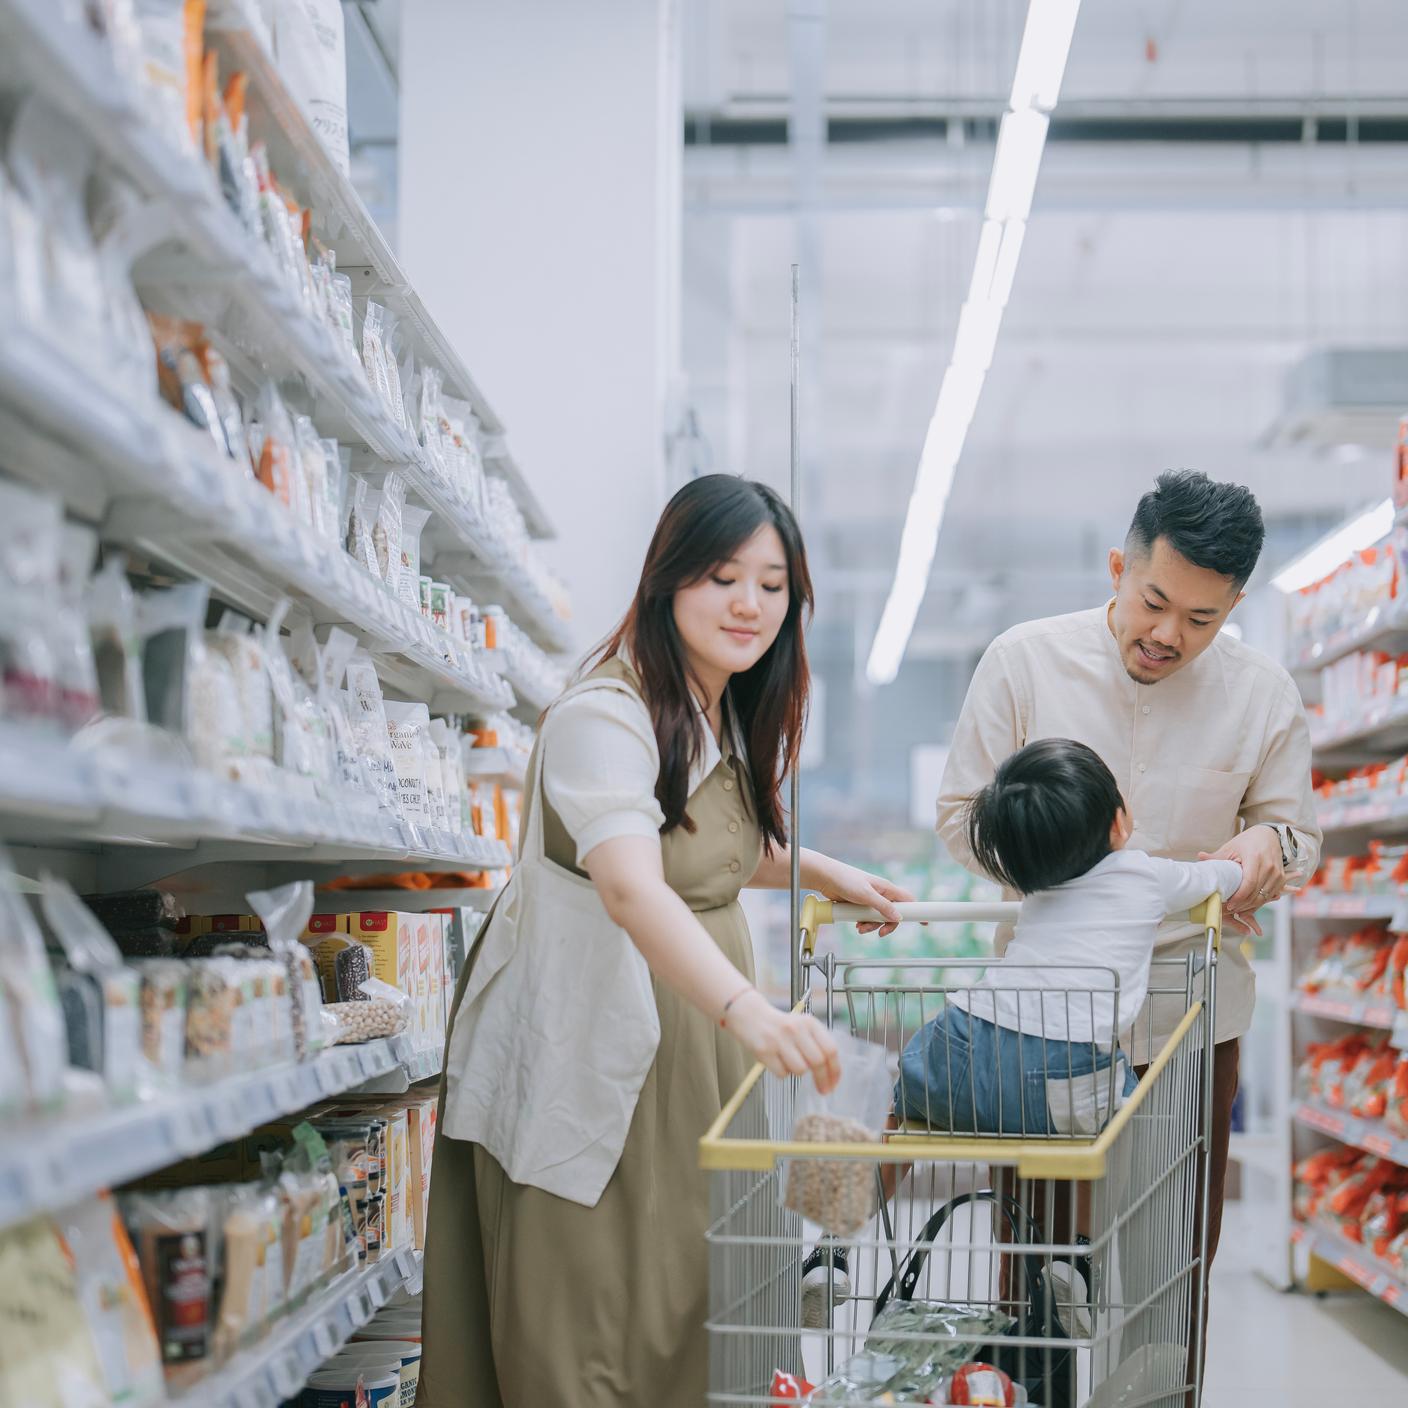 Family buying groceries in supermarket refrigerated section